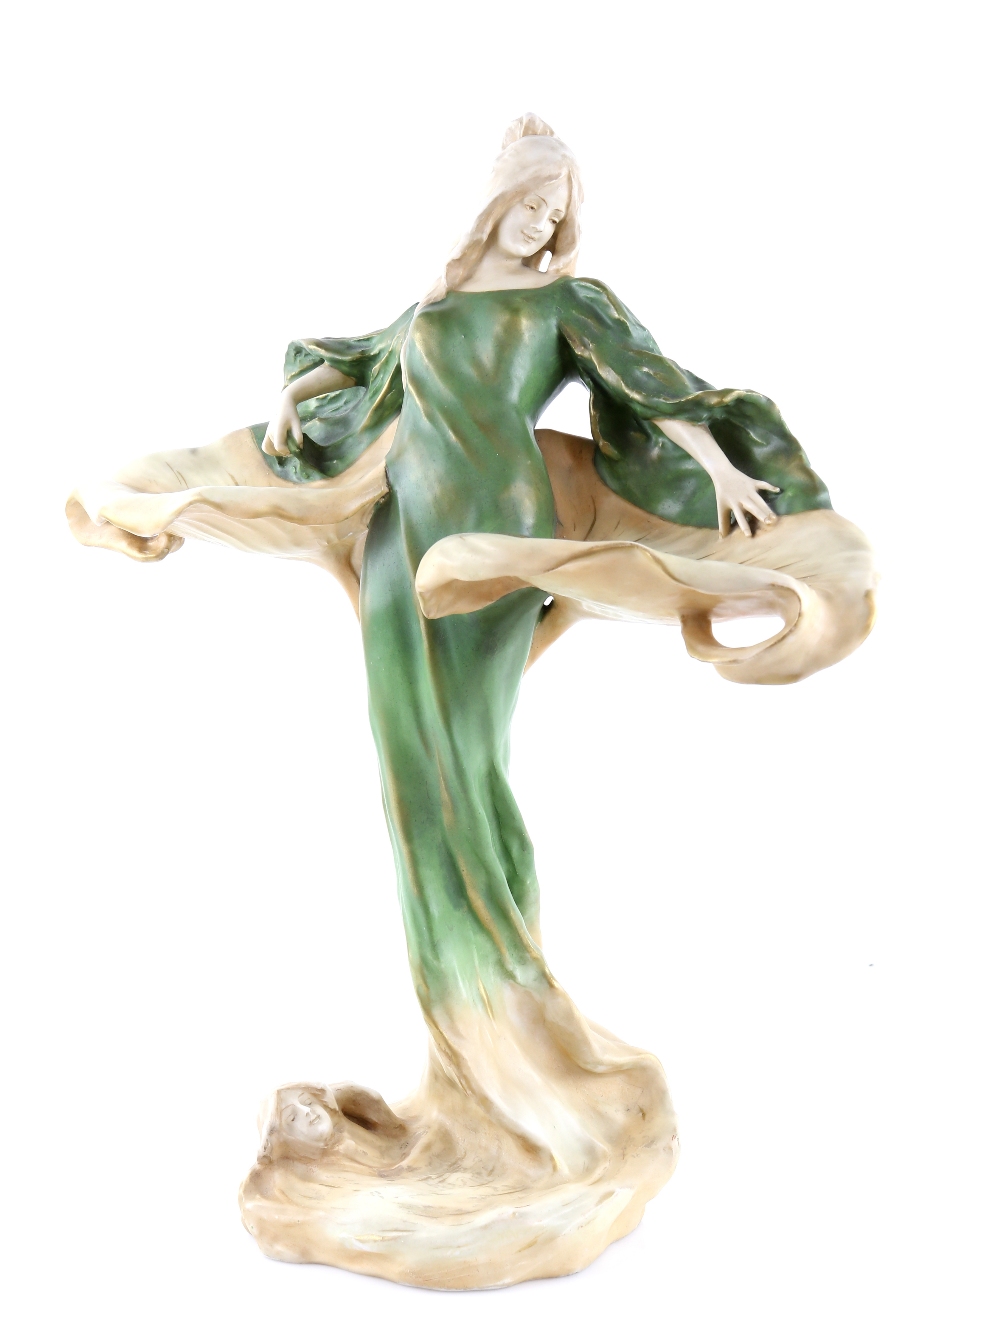 Amphora Austria, Art Nouveau table centrepiece circa 1900 in the form of a long-haired maiden in